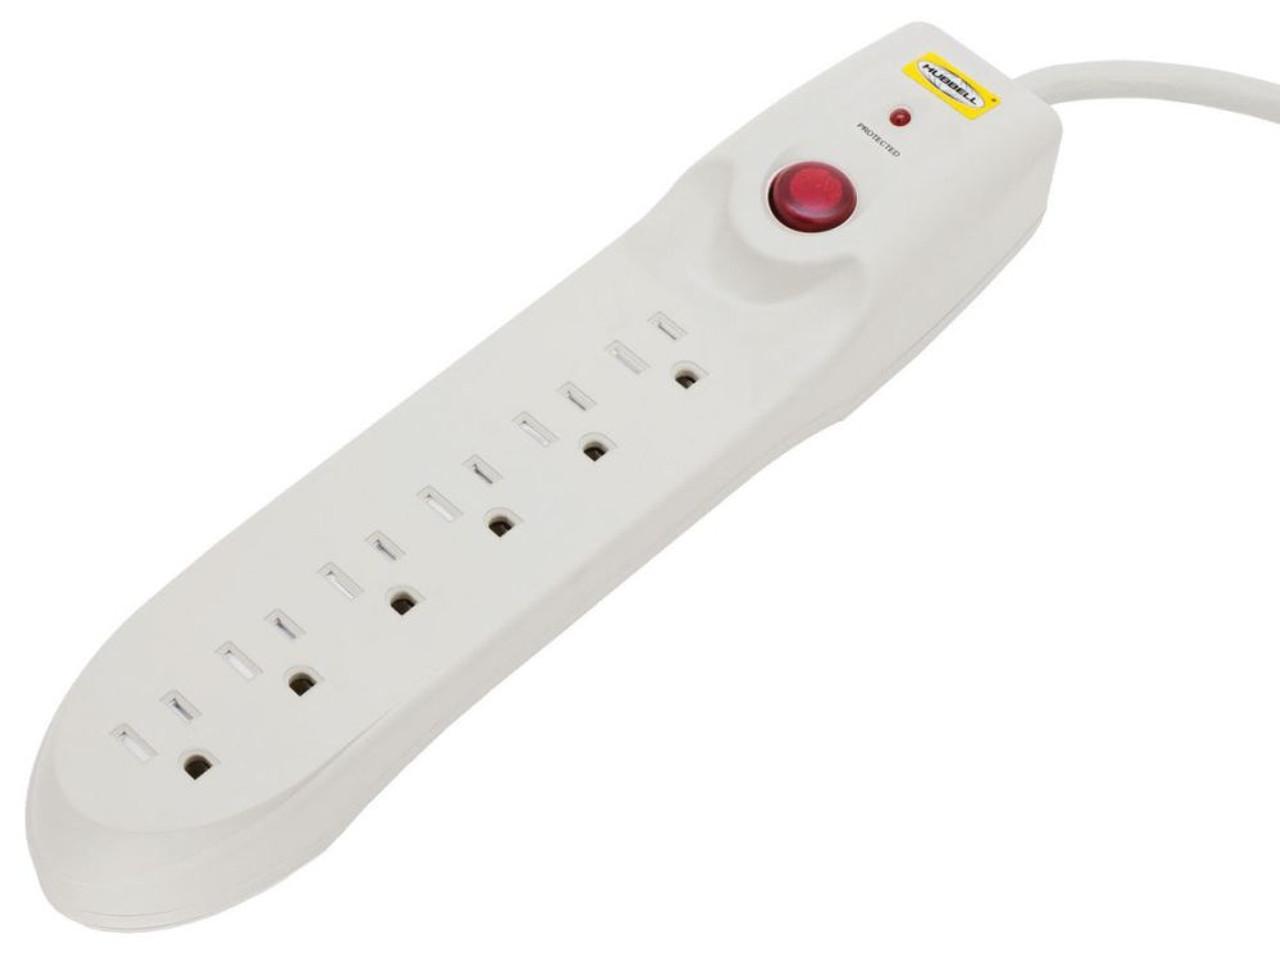 Hubbell HBL6PS35015A Surge Protective Devices, SPIKESHIELD TVSS Plug Strips, 15A 125V, 6 Outlet, 350 Joules, 15' Cord, Office White  ; 1050 joule, 6 foot cord, $5,000 down-line warranty ; Tamper tamper resistant shutters. ; 15' Cord